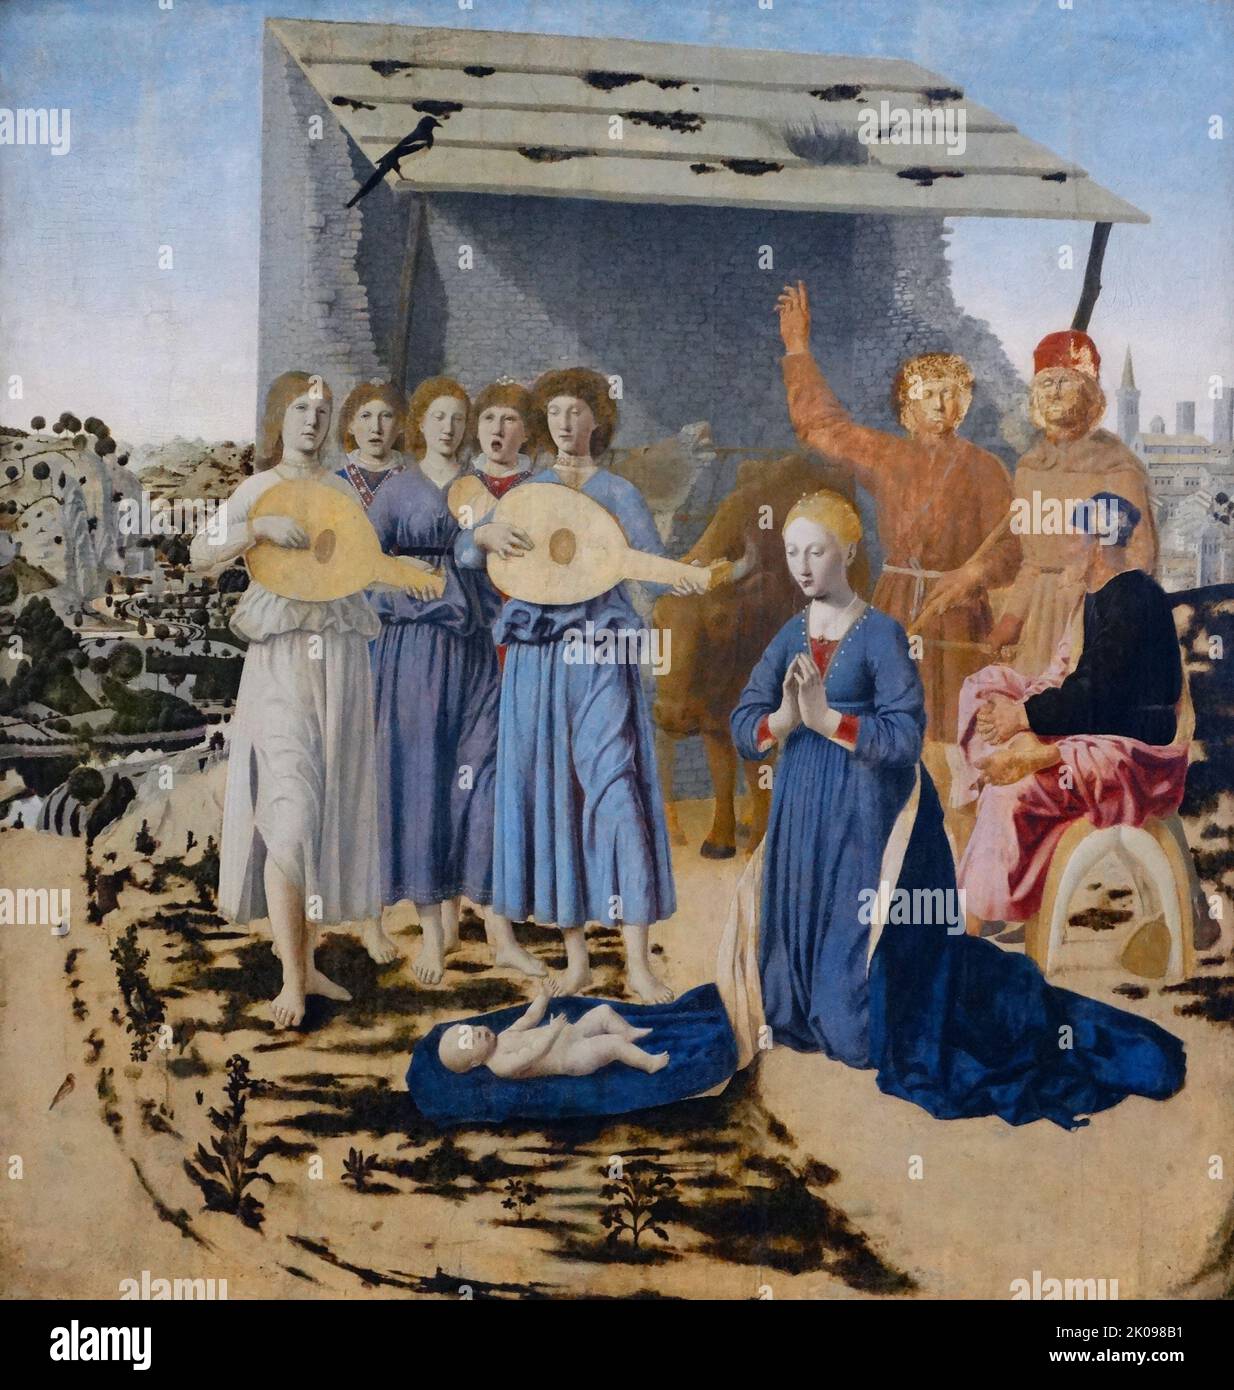 The Nativity by Piero del Fransesca. The Nativity is an oil painting by Italian artist Piero della Francesca, dated to 1470-75. The painting depicts a scene from the birth of Jesus, and is one of the latest surviving paintings made by the artist before his death in 1492. Stock Photo